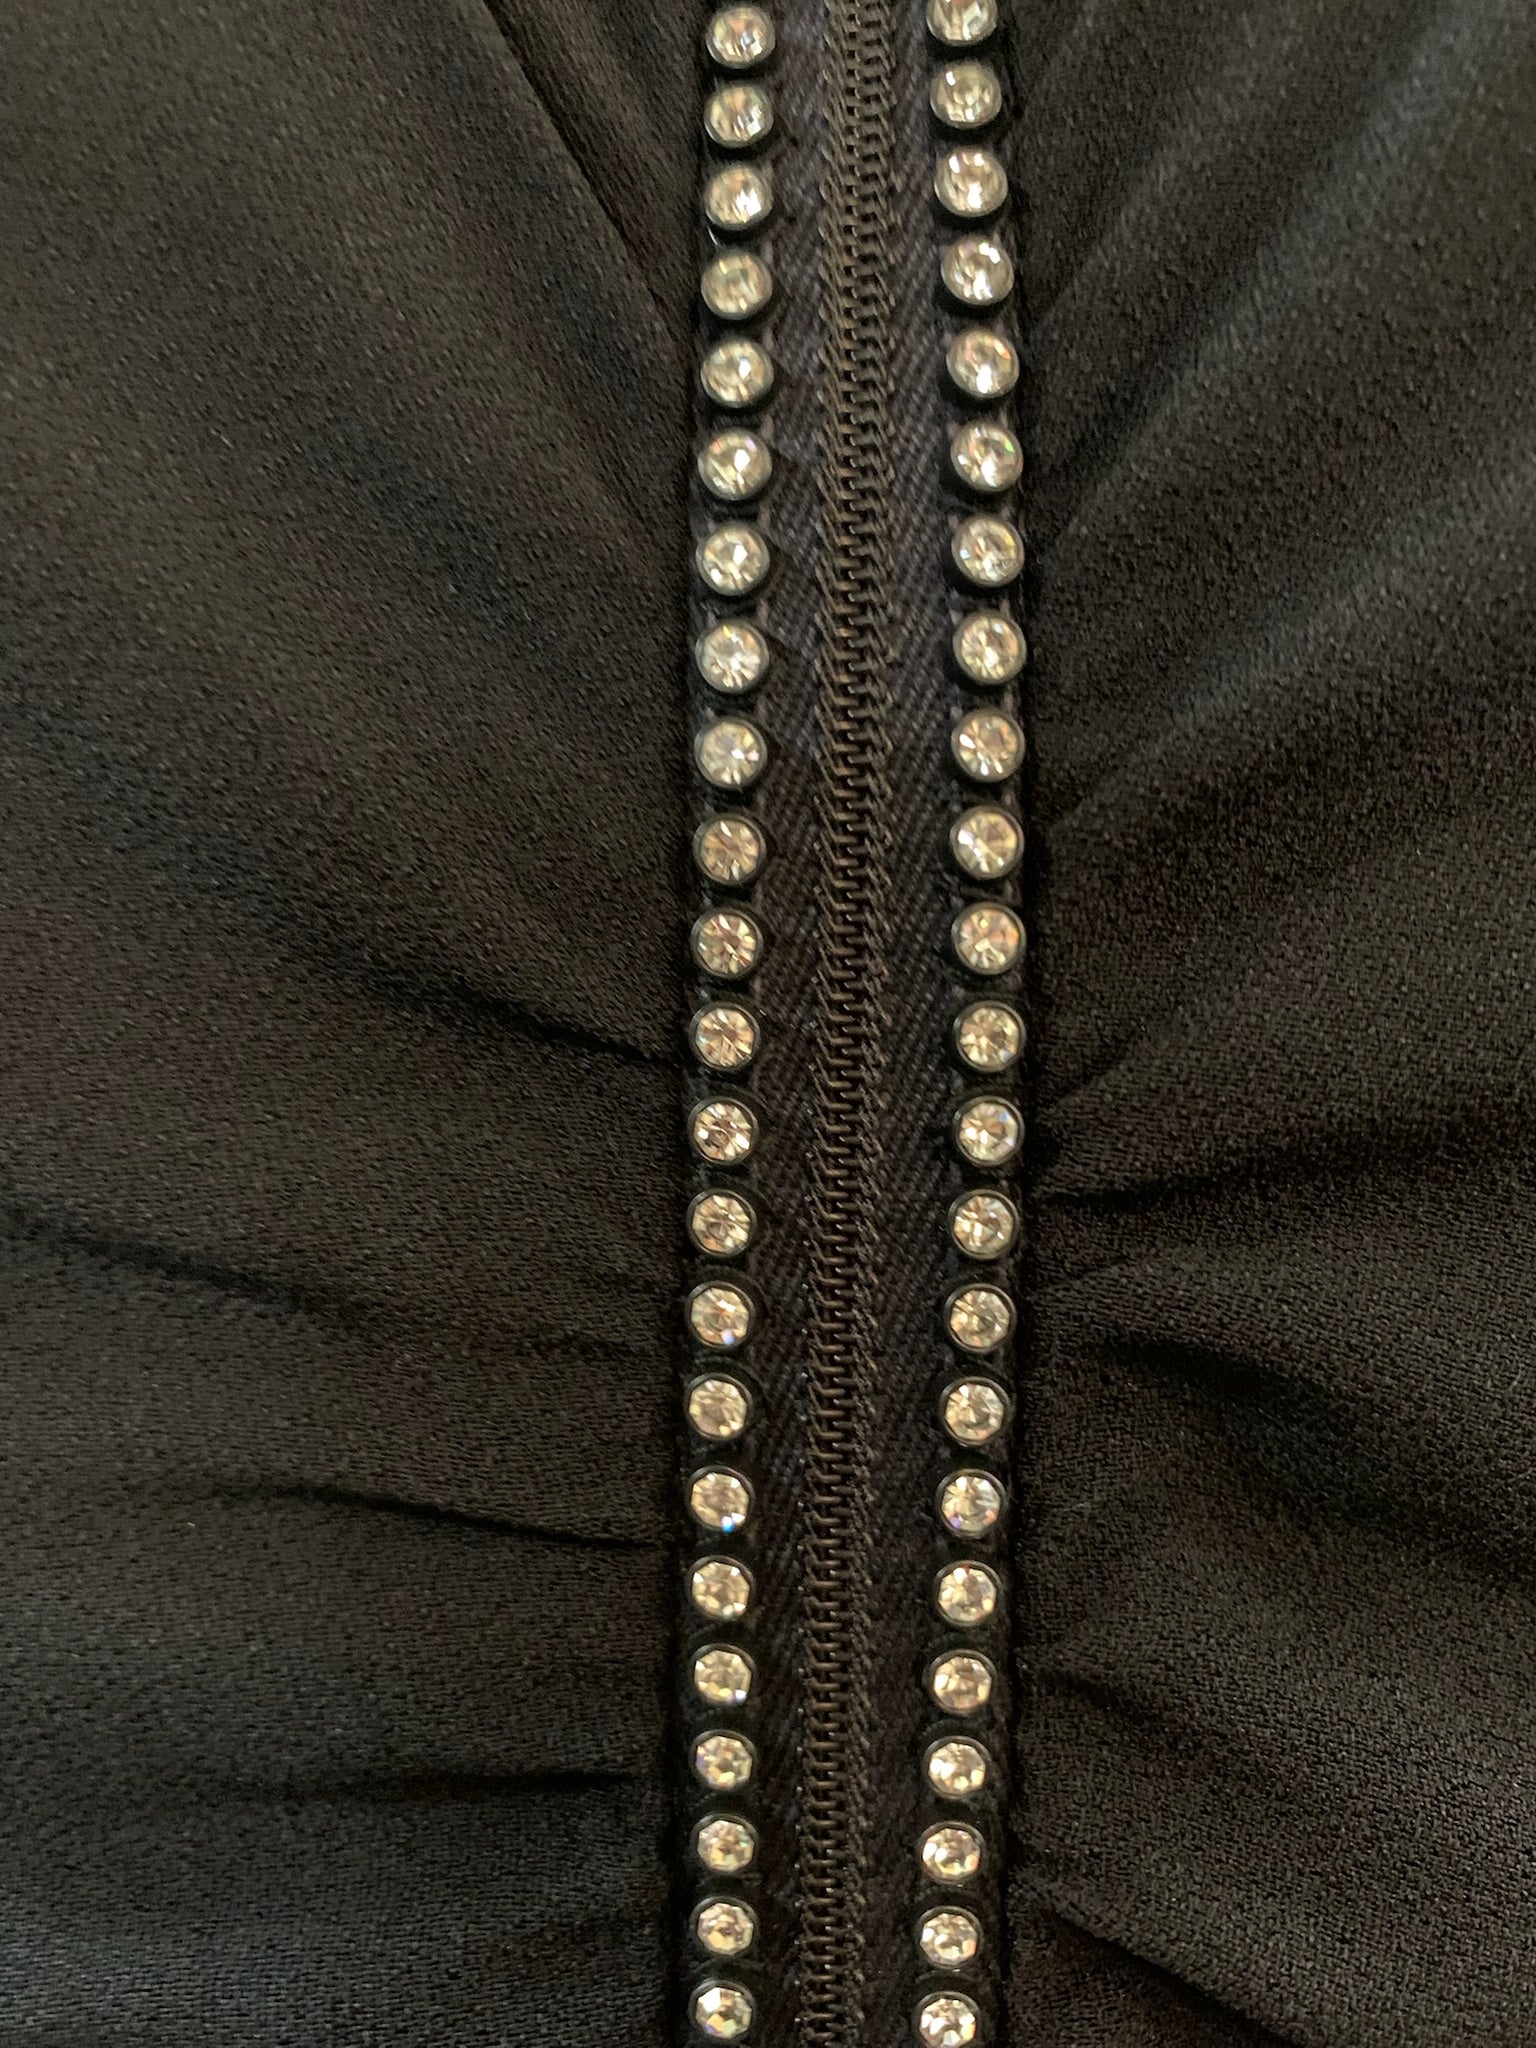  YSL Rive Gauche 80s Black Cocktail  Dress with Rhinestones DETAIL 4 of 5